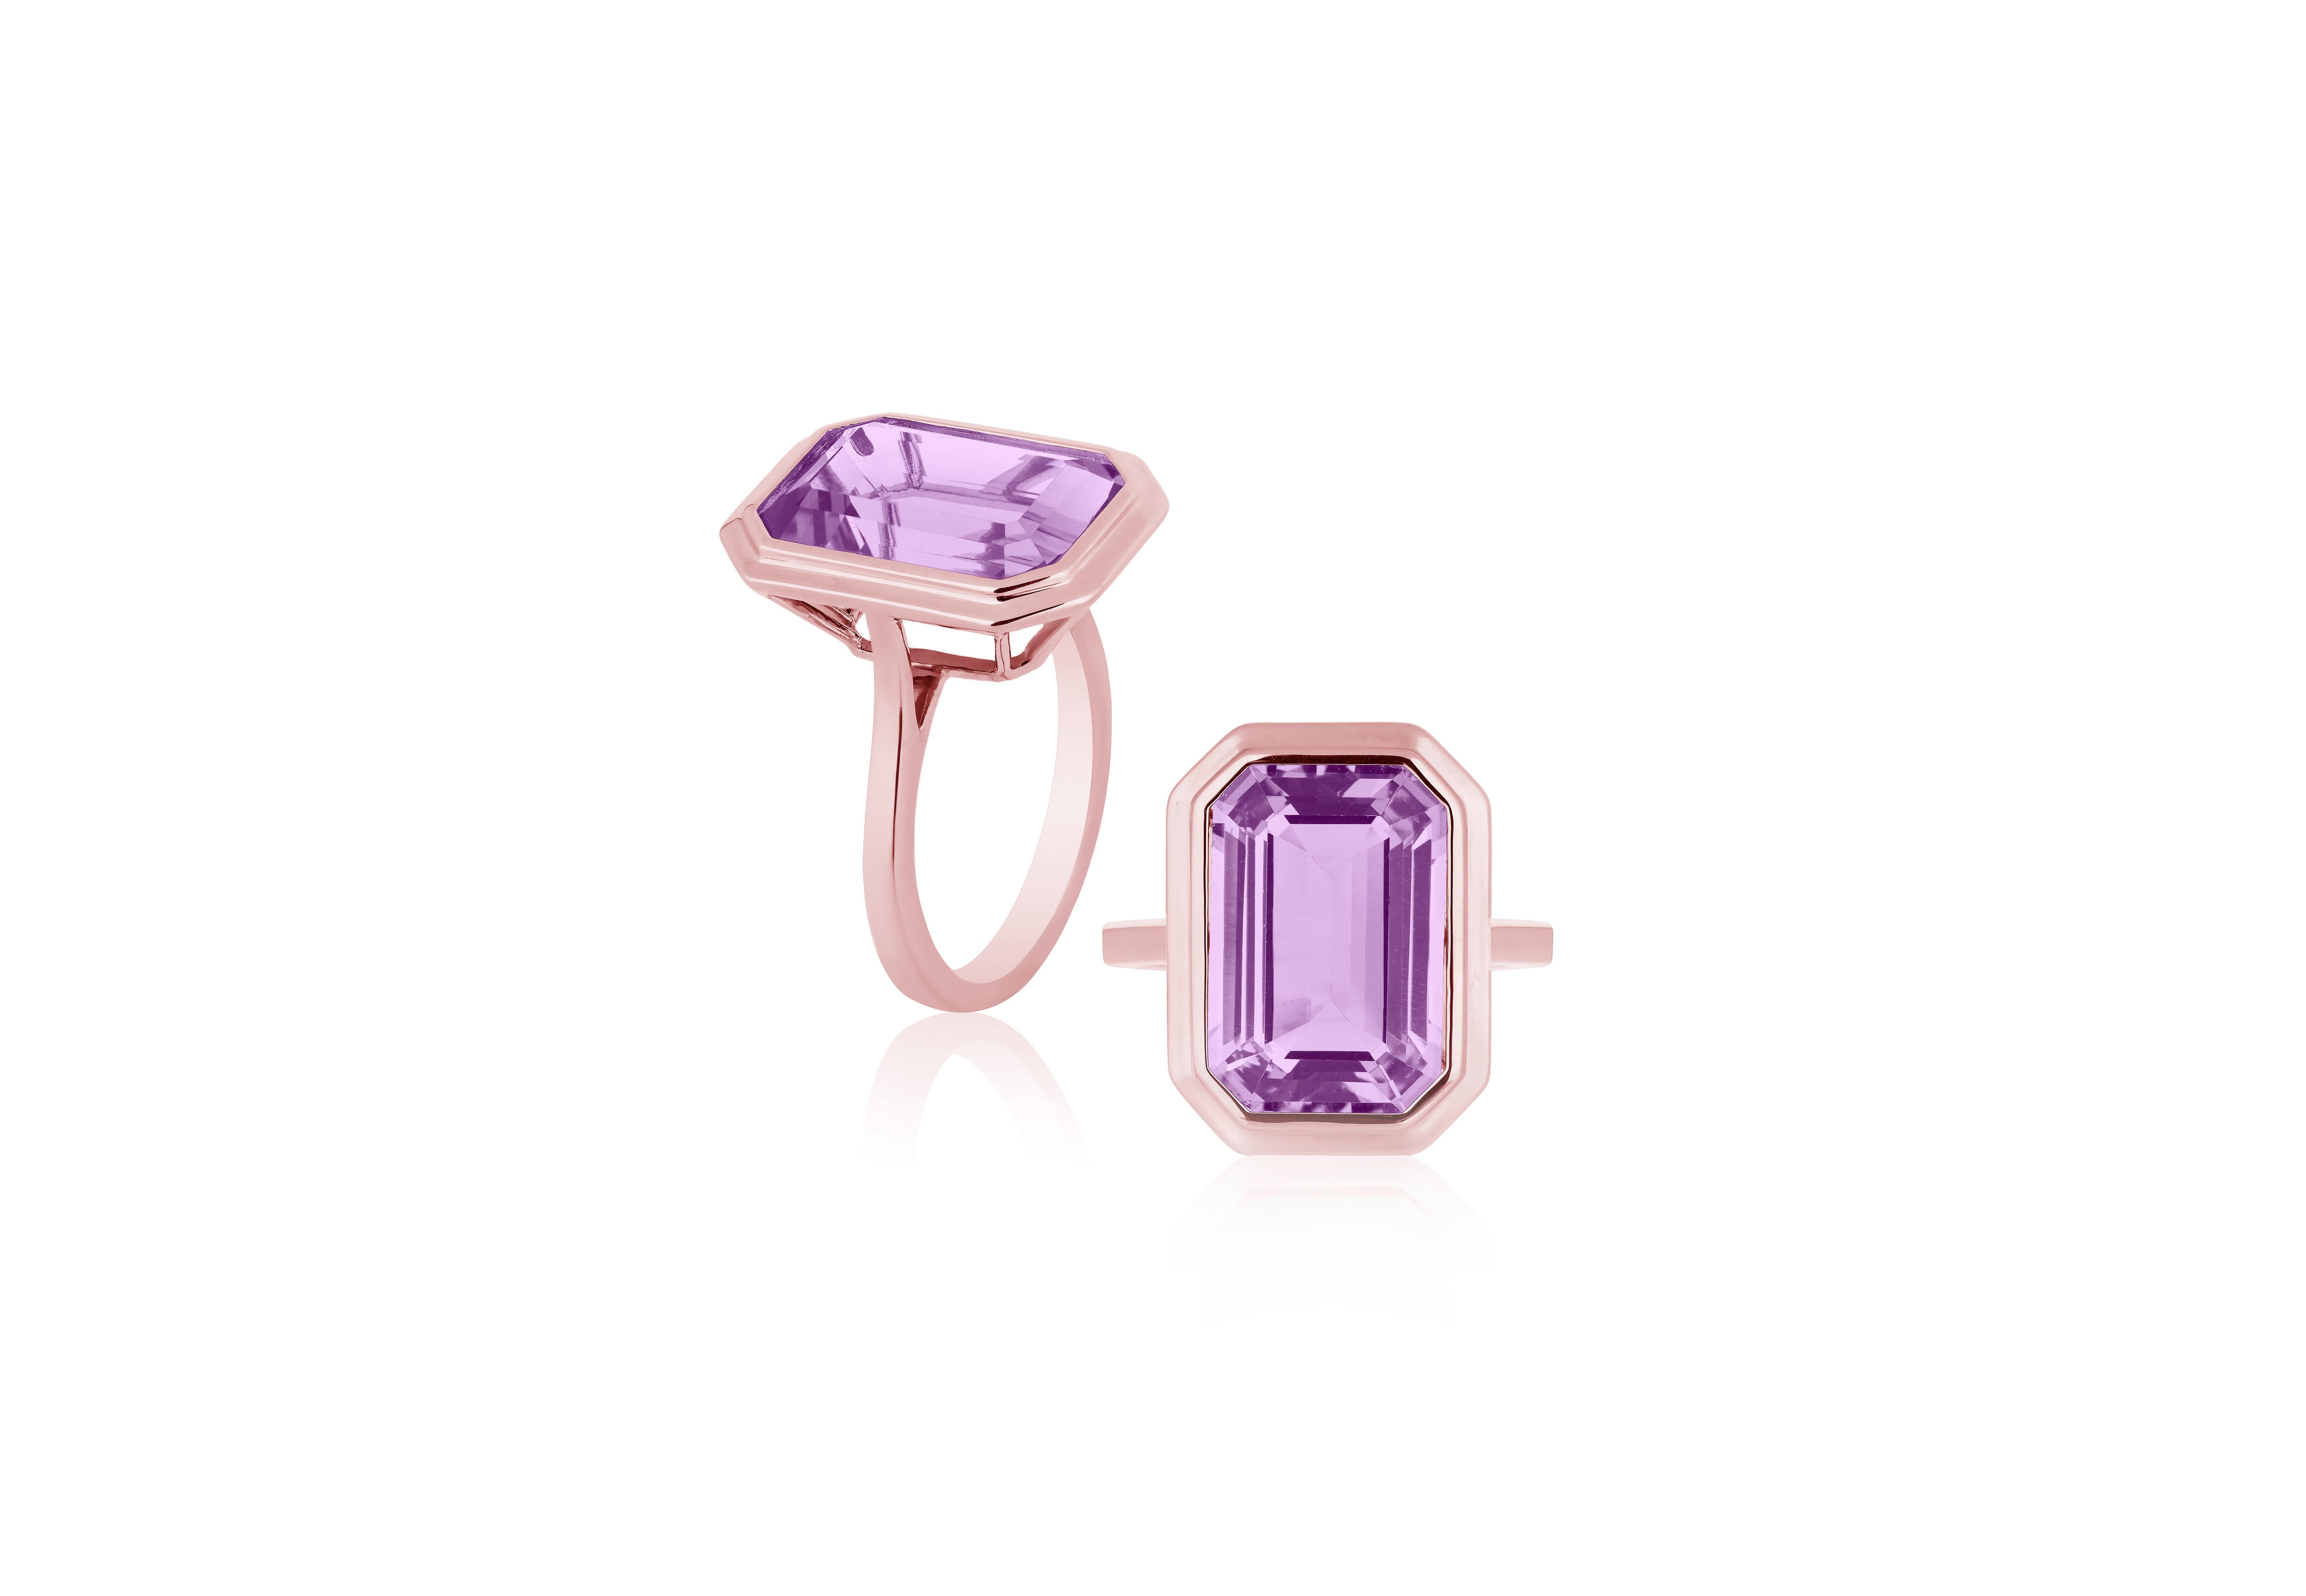 A classic yet an everyday bold statement piece, this amazing cocktail ring is part of our very new ‘Manhattan’ Collection. It has a 10 x 15 mm emerald cut Lavender Amethyst in a bezel setting in 18k gold.   ​

Minimalist lines yet bold structures is